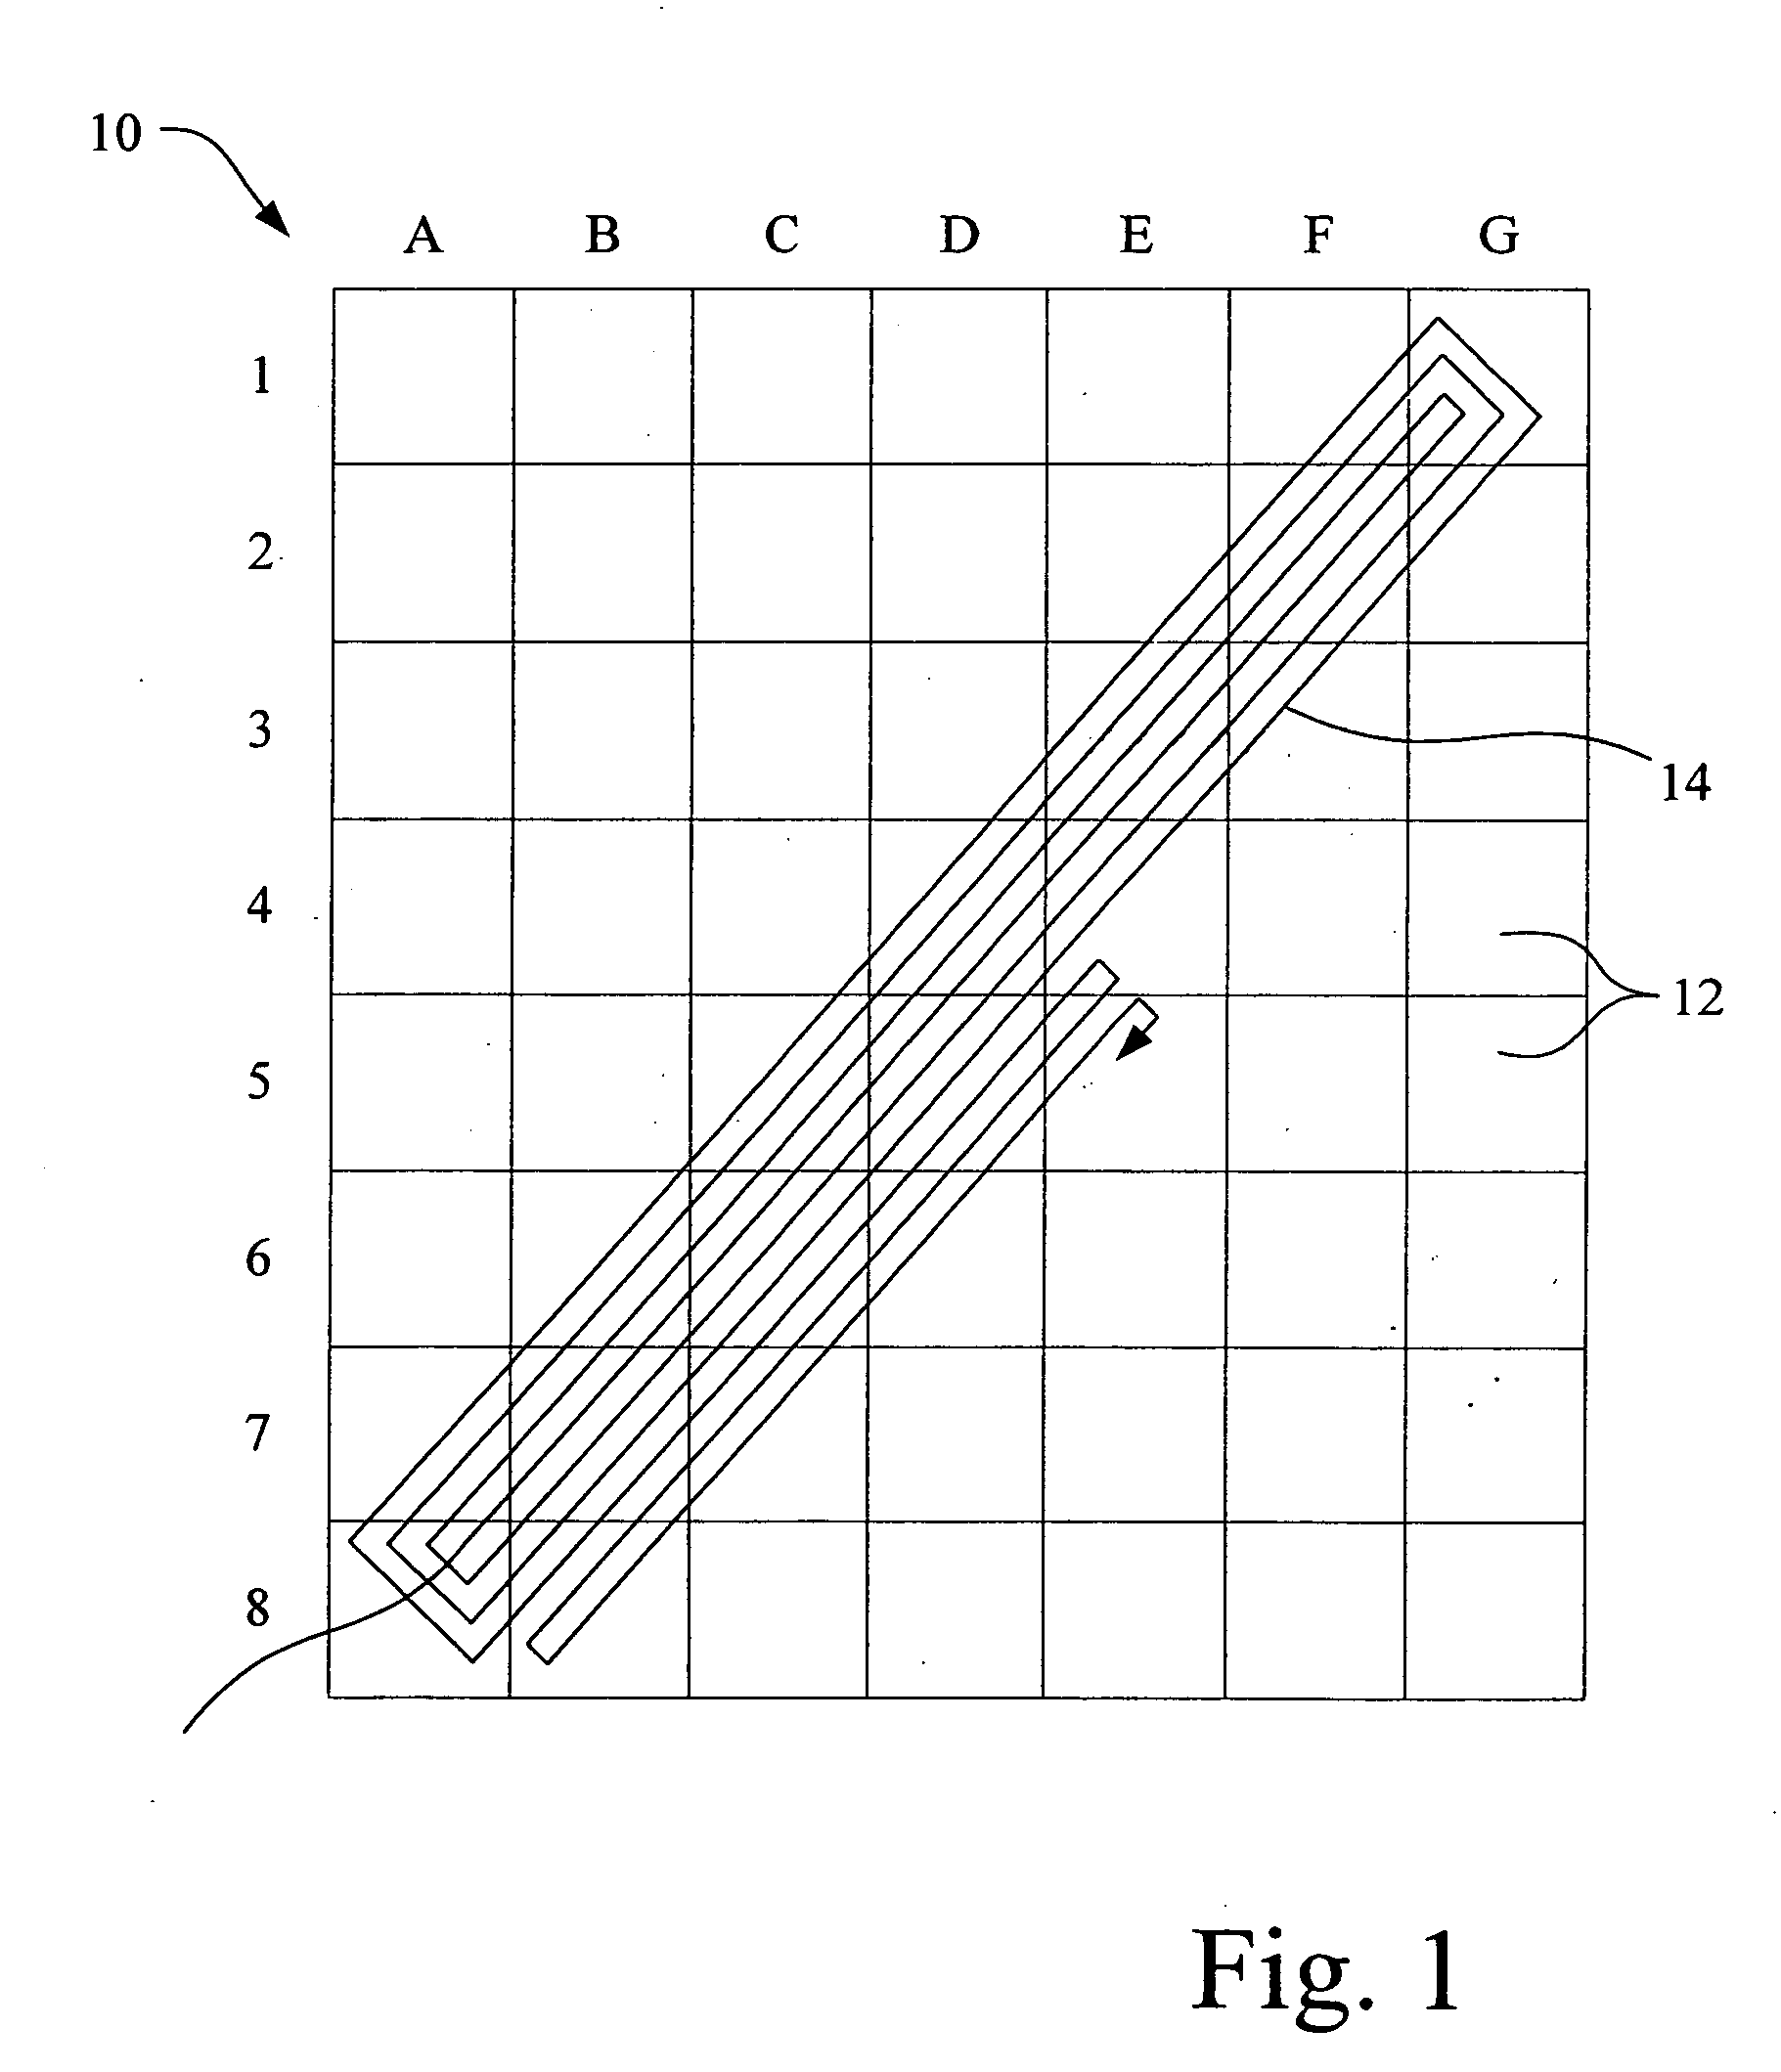 Vehicle area coverage path planning using isometric value regions